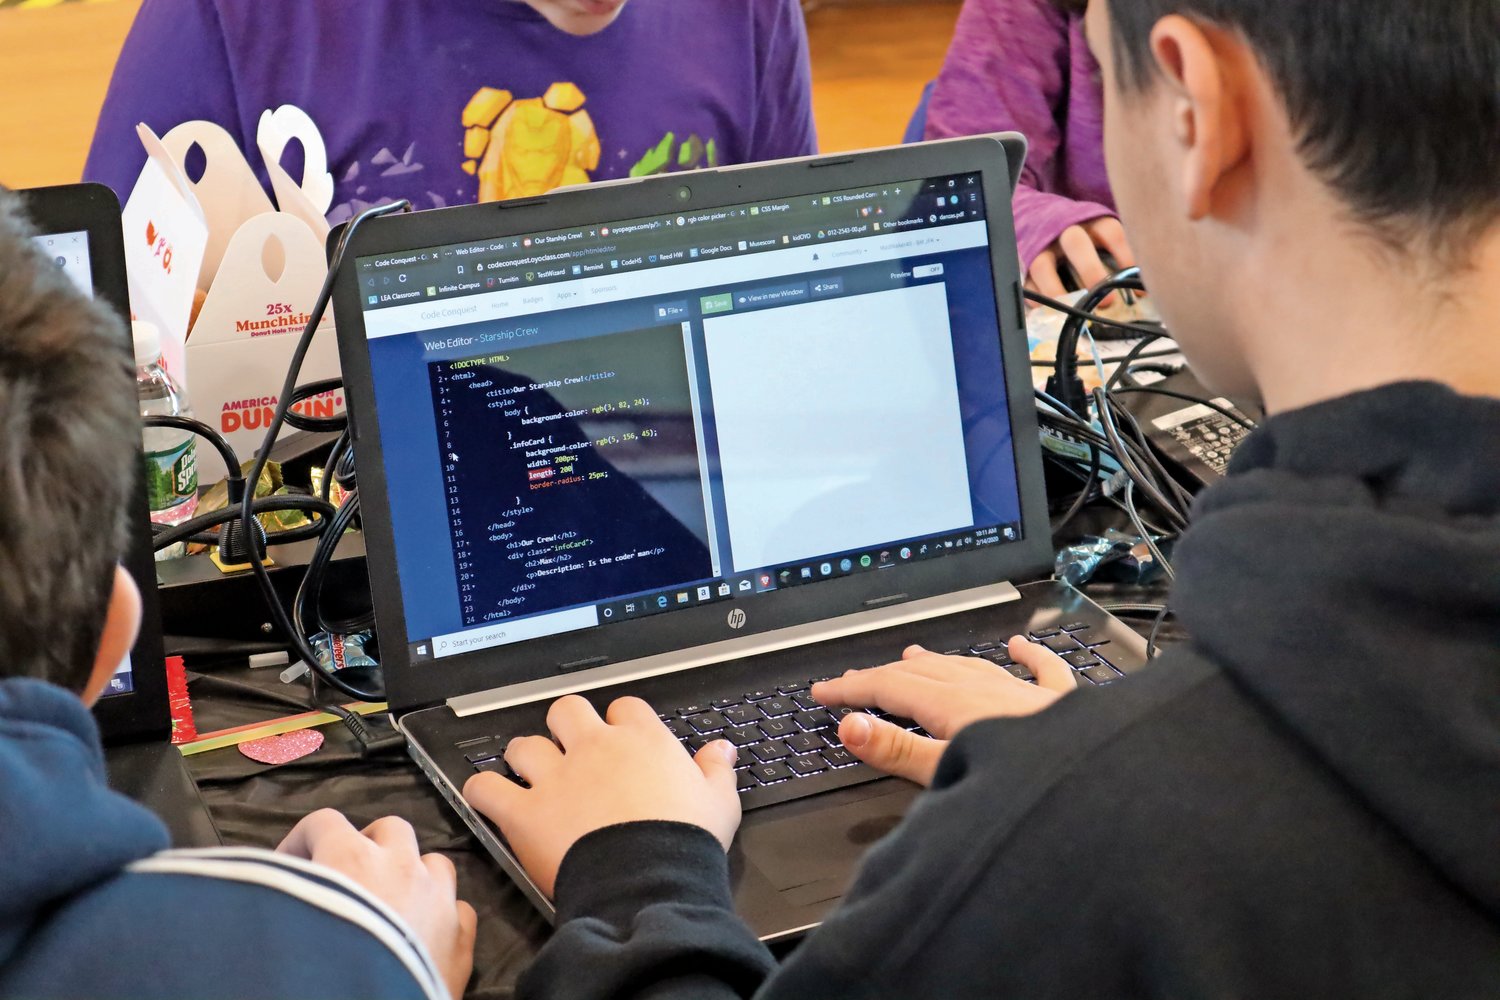 At the Hackathon, coding was the name of the game. Students had to complete challenges in coding languages like Python and Hatch to take over a virtual Mars.